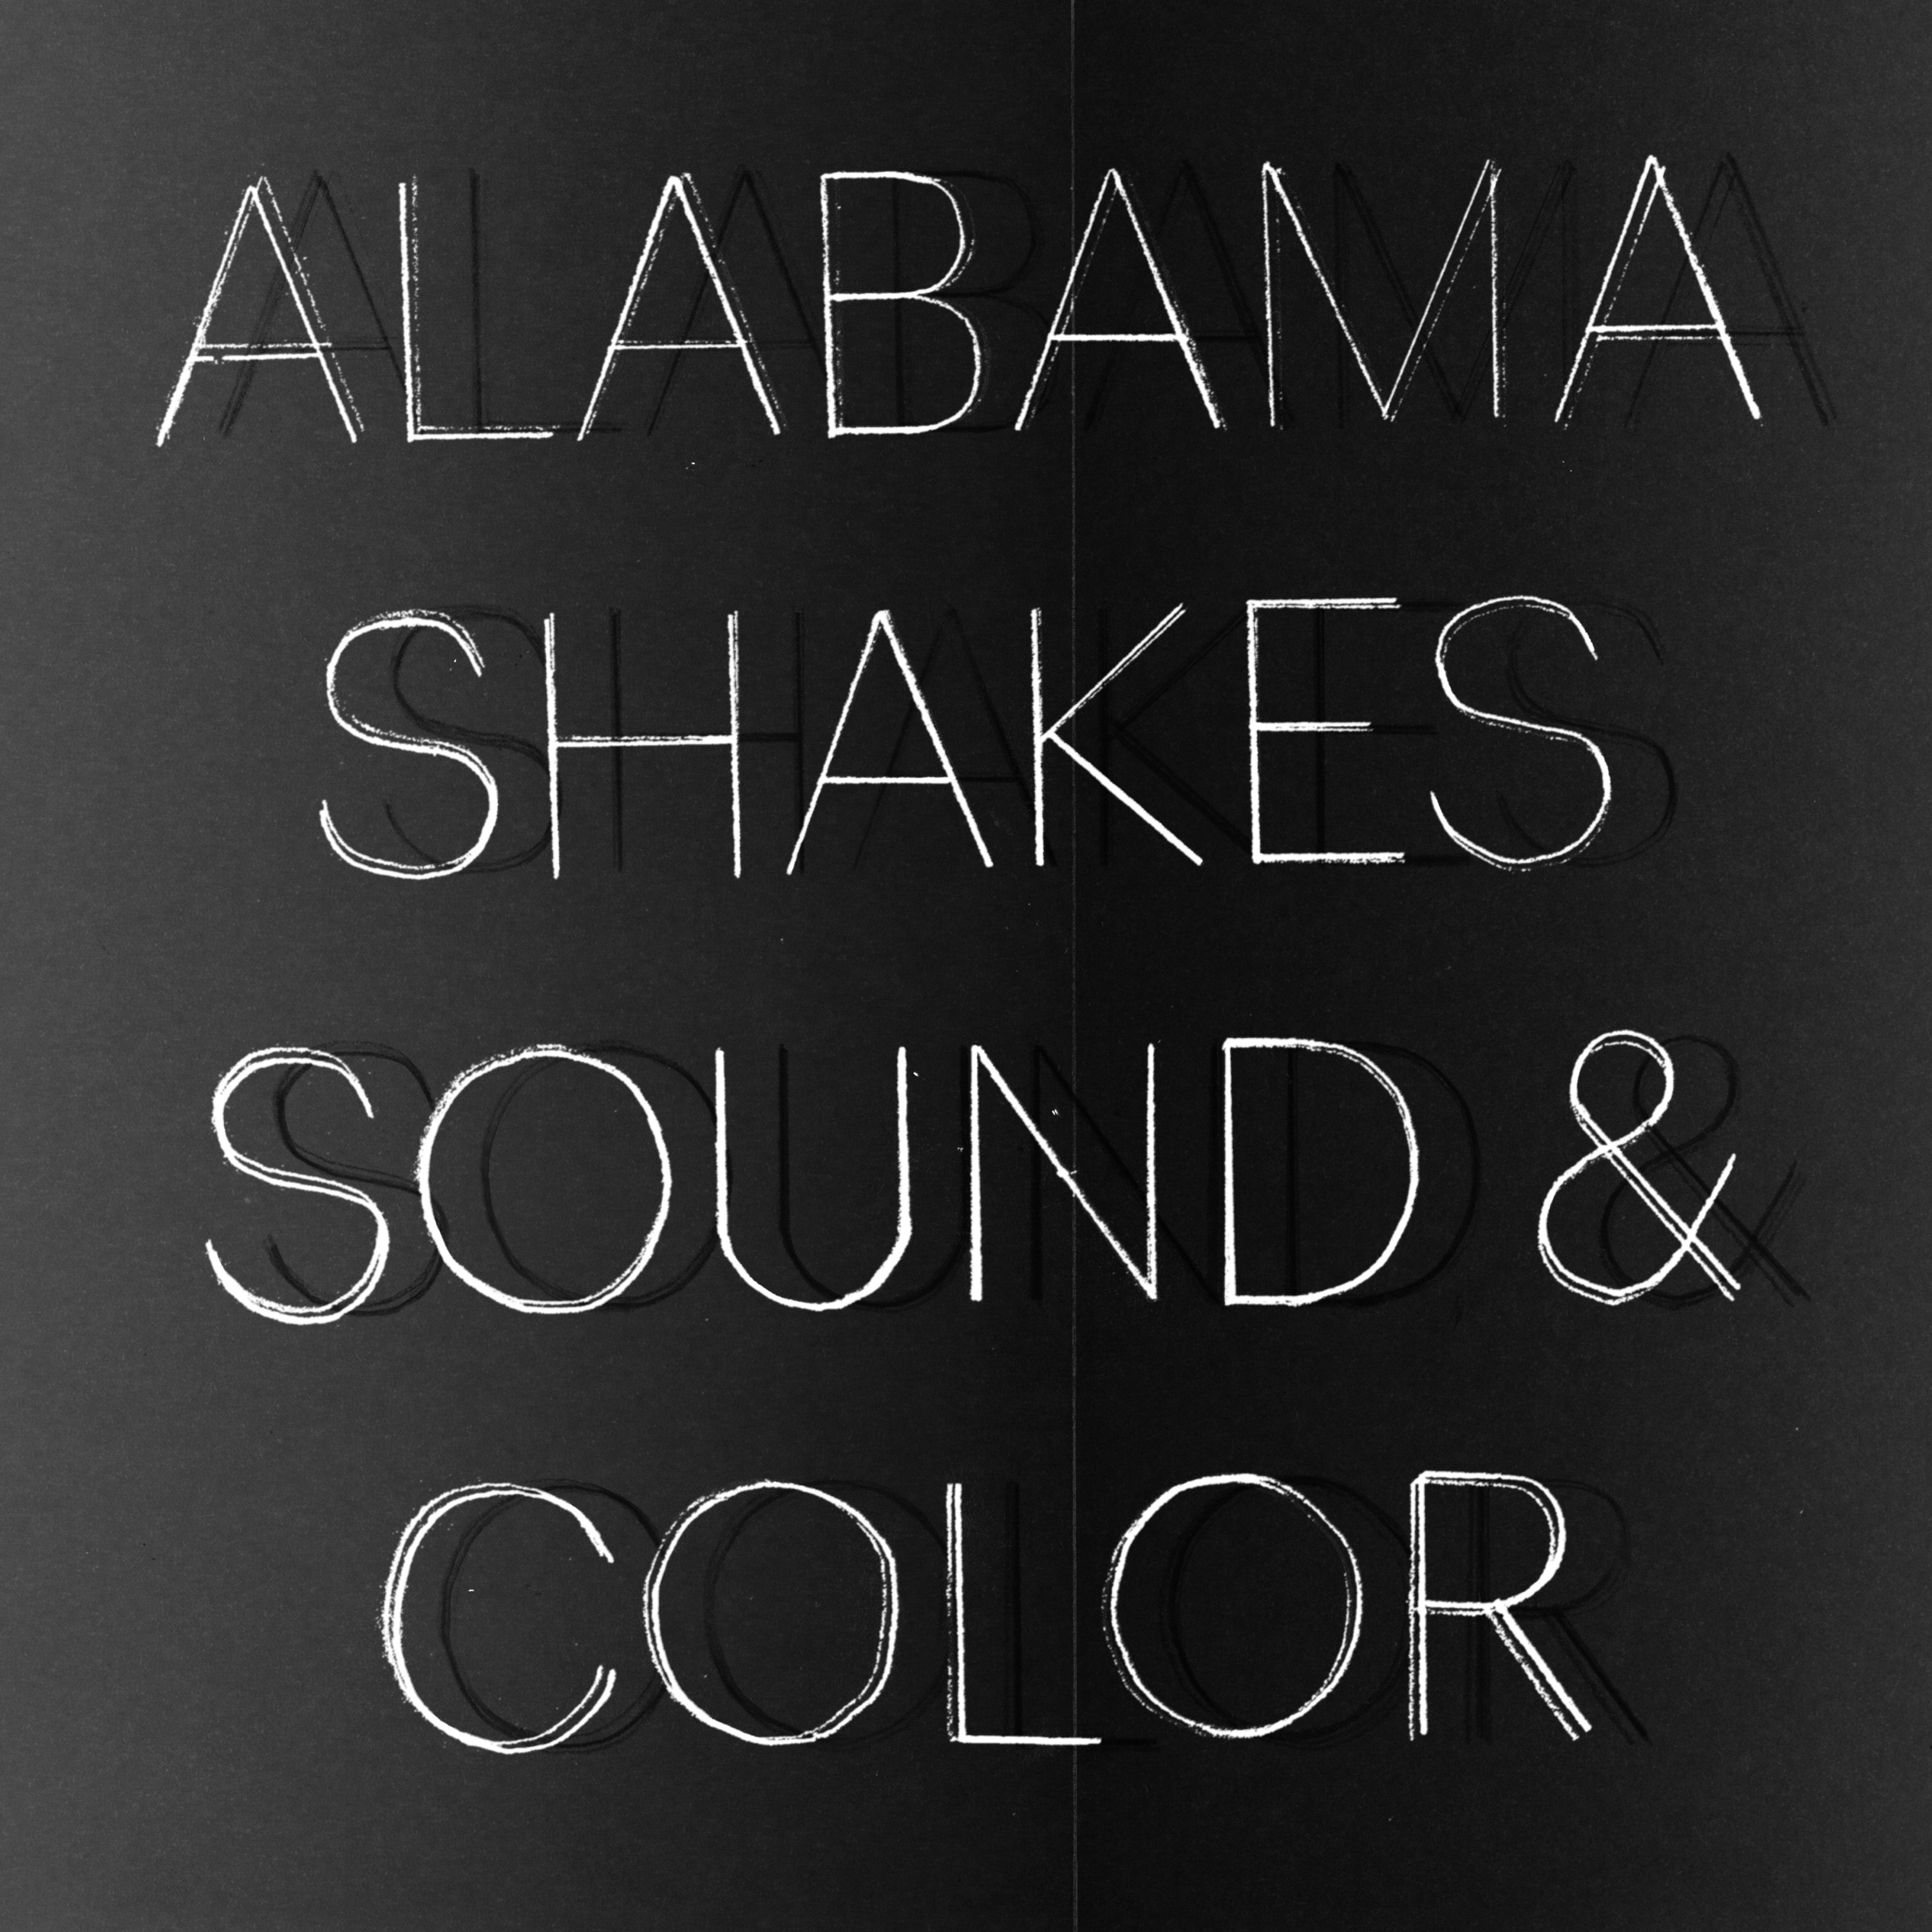 Alabama Shakes - Sound & Color (Deluxe Edition) - CD